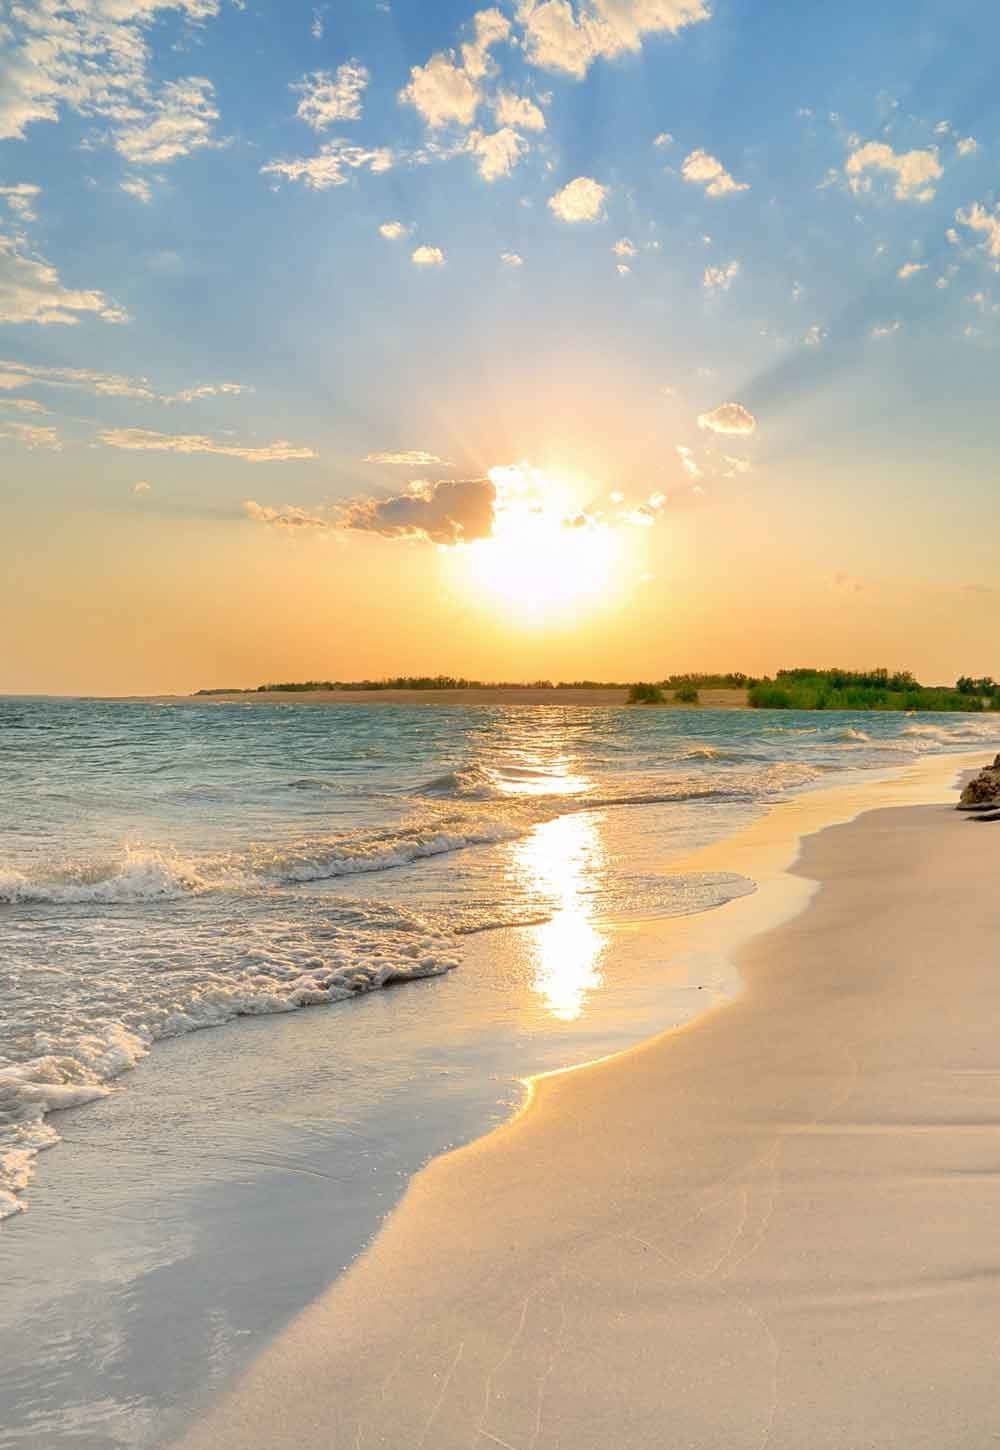 Take in the beauty of a Summer Beach Day with this stunning background